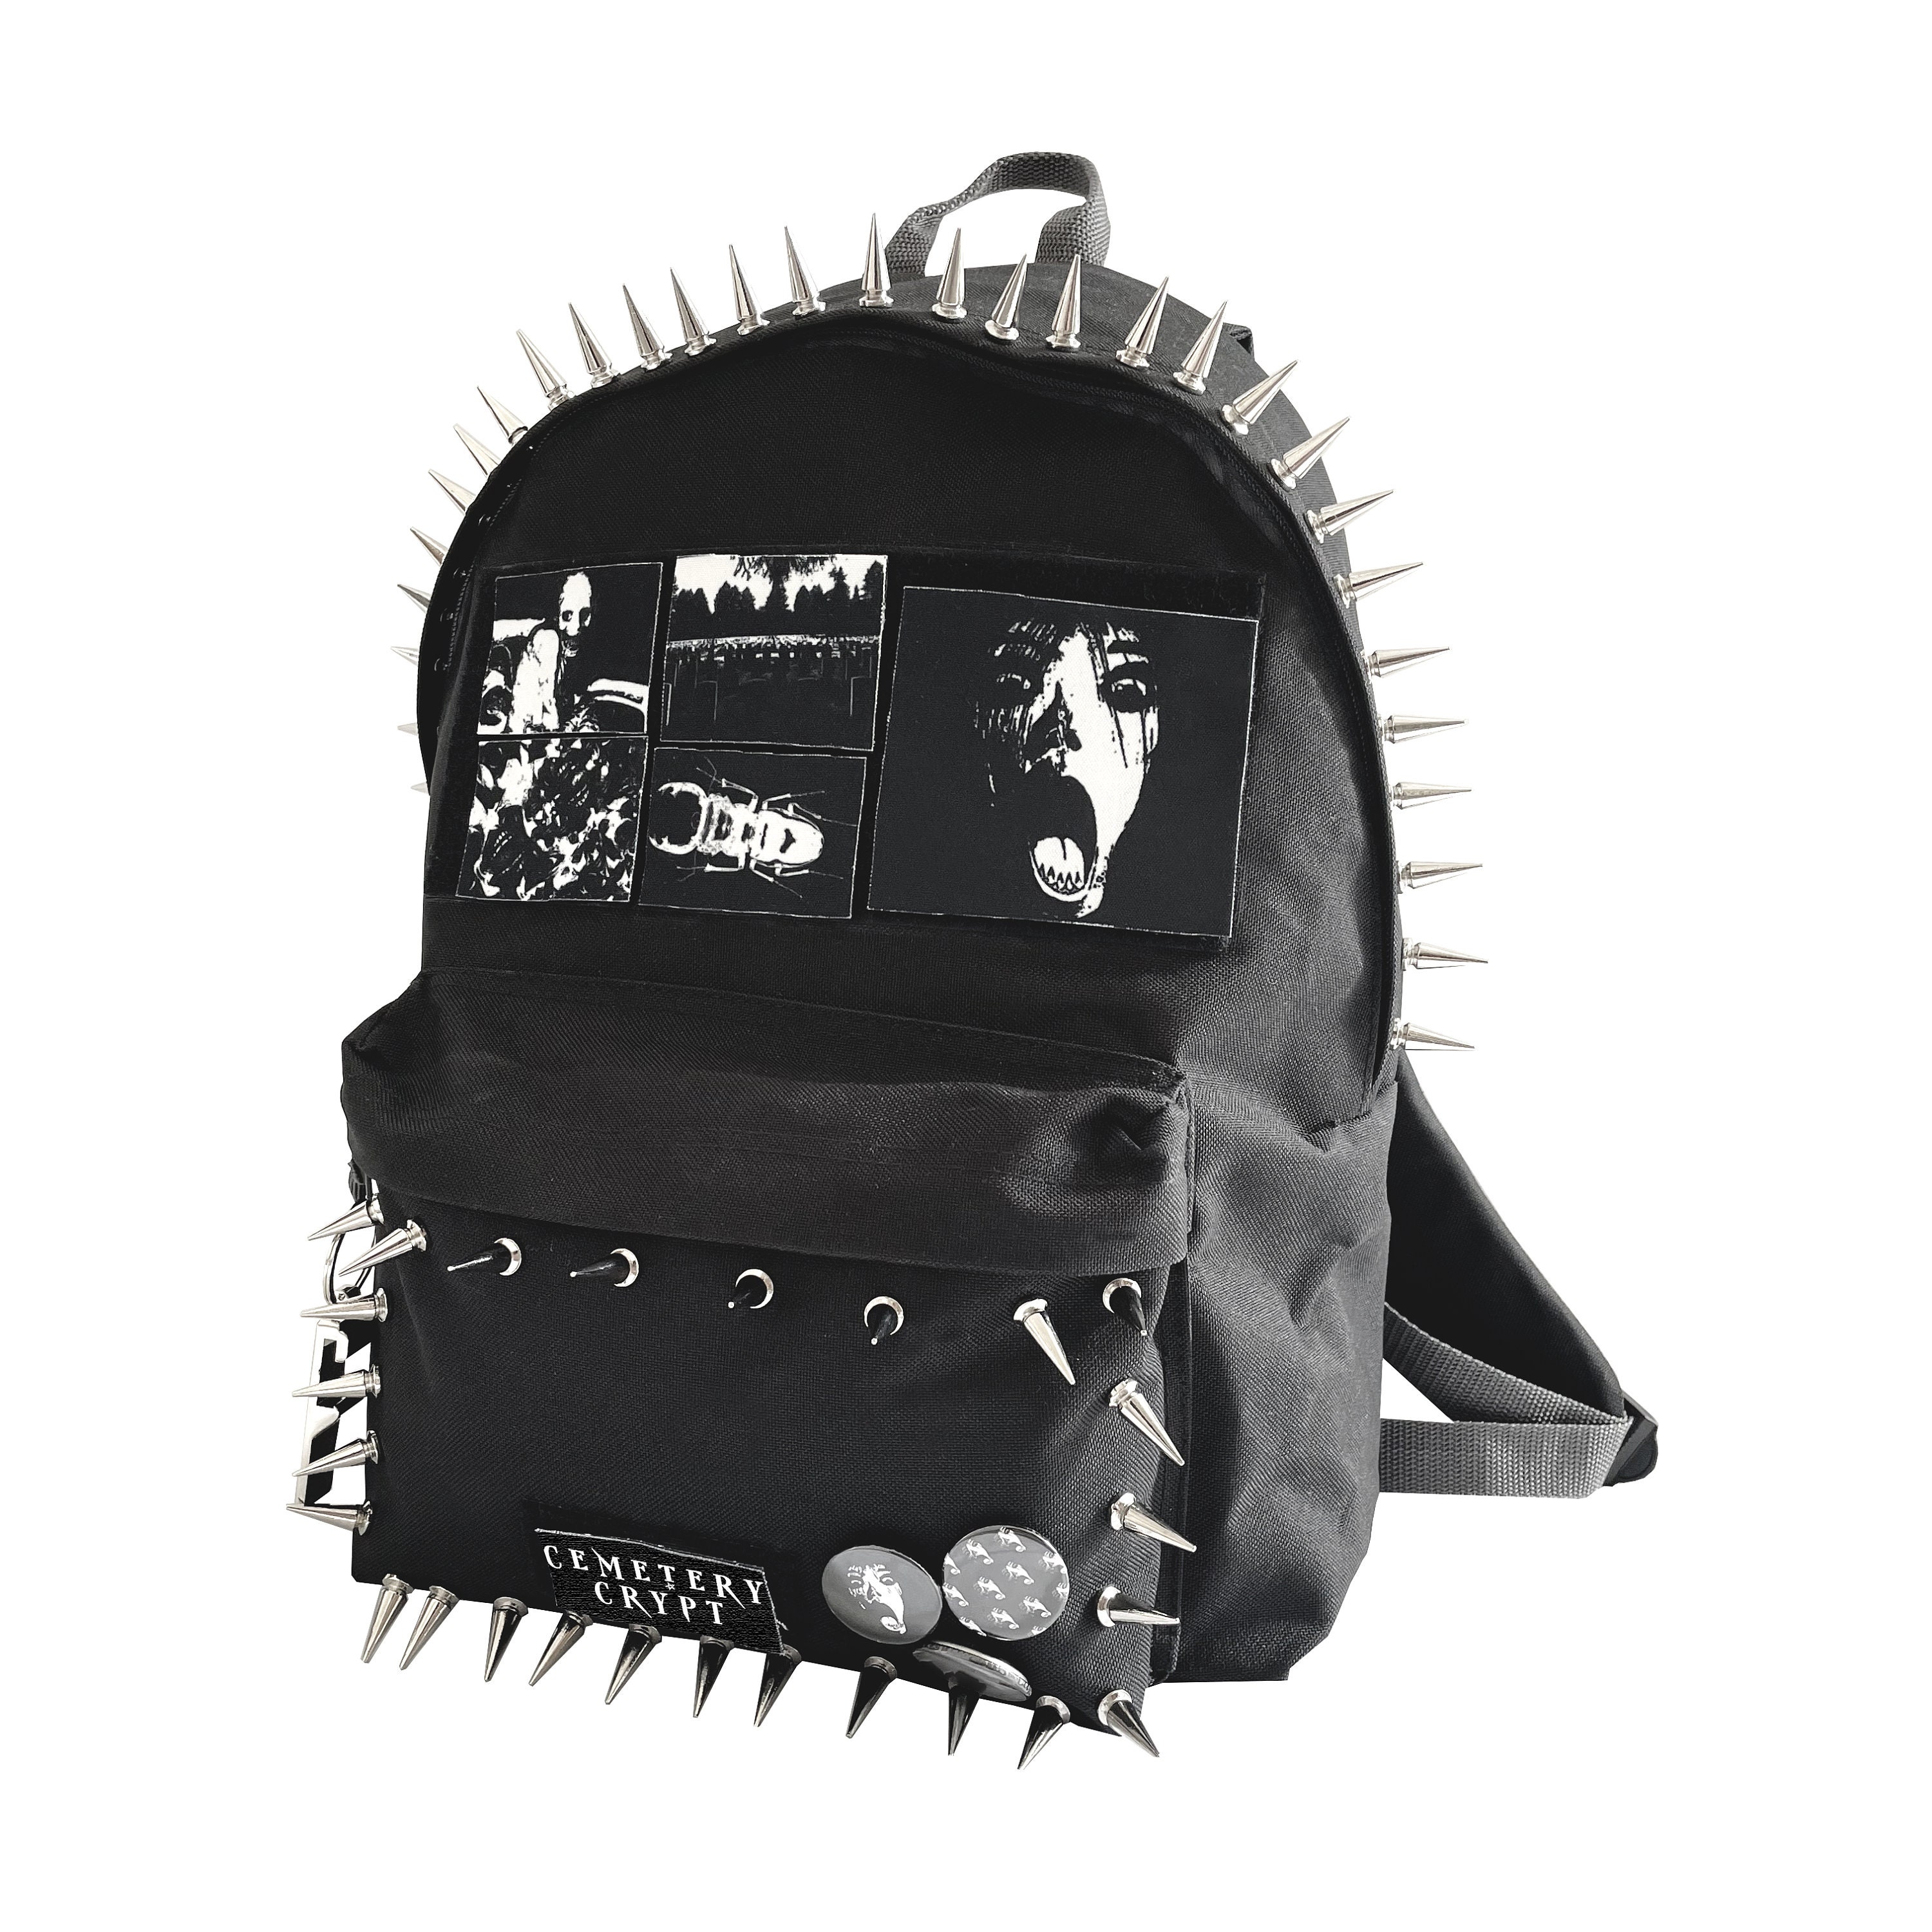 Buy 90s Grunge Tech Bag Online In India -  India